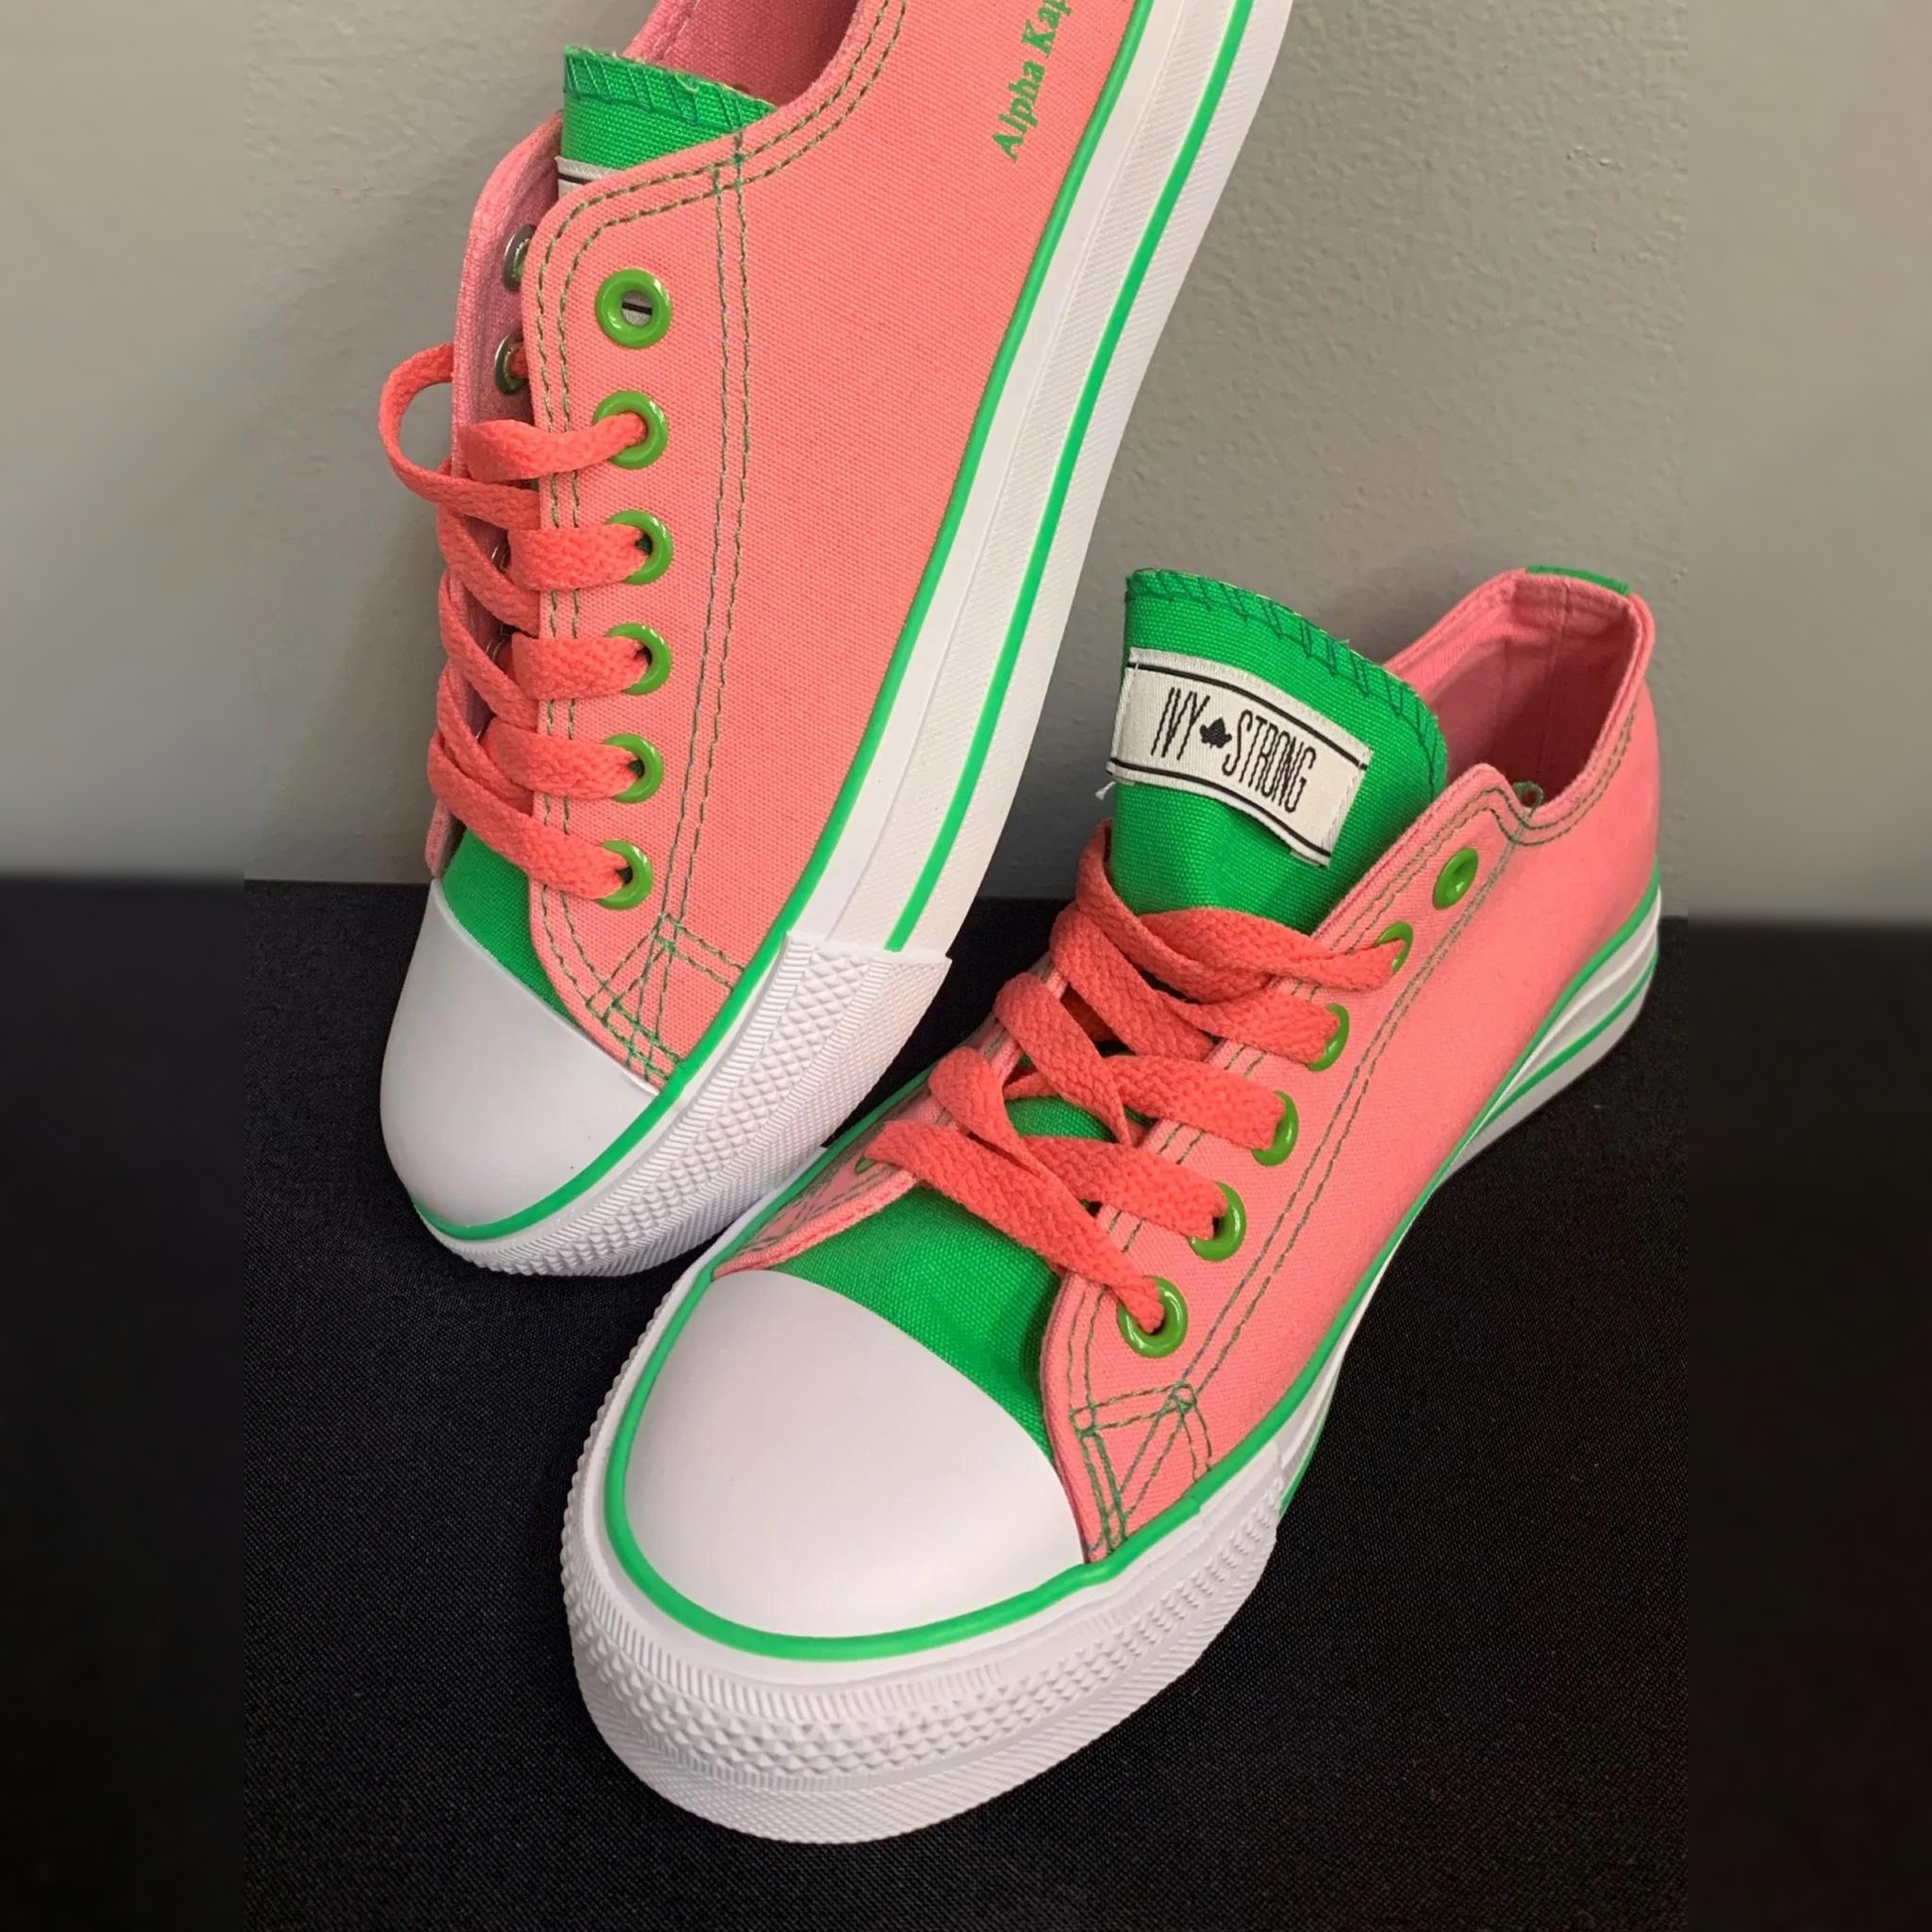 Stipendium Standard At opdage AKA | Classy Tennis Shoes – Pink and Unique